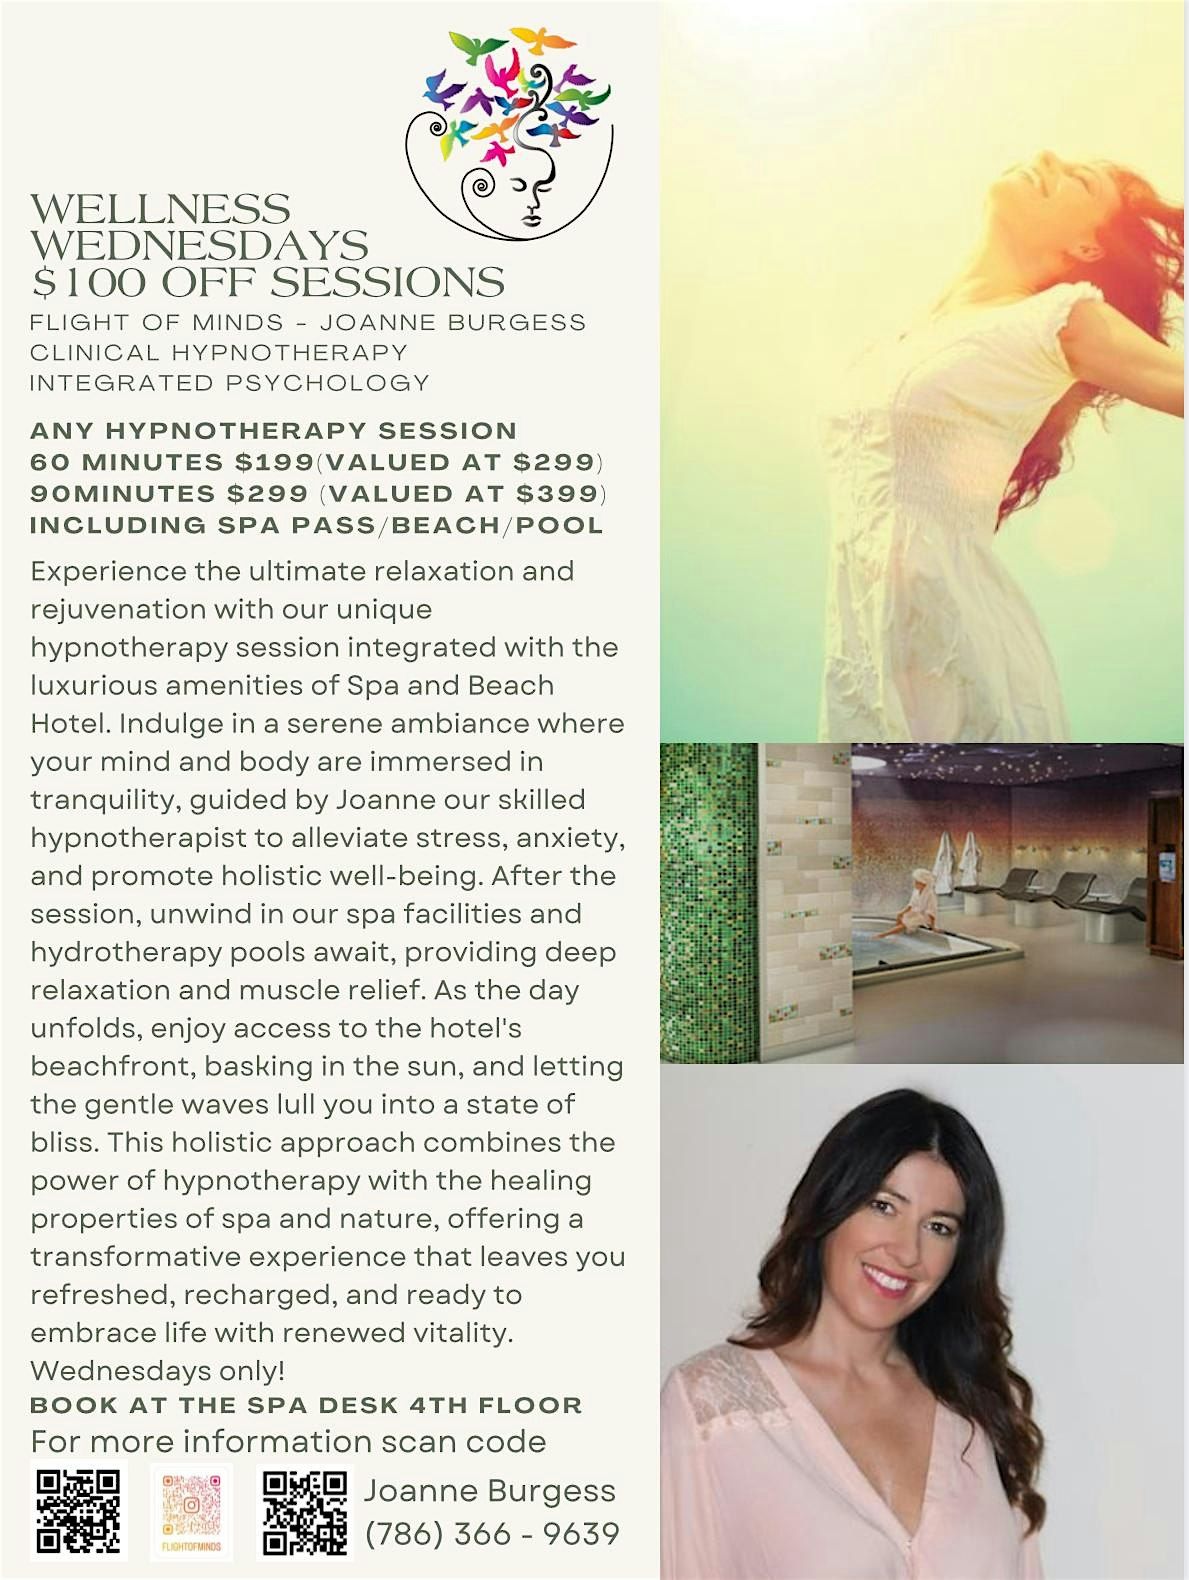 Wellness Wednesday  $100 OFF  -Hypnotherapy session - including Spa - Beach